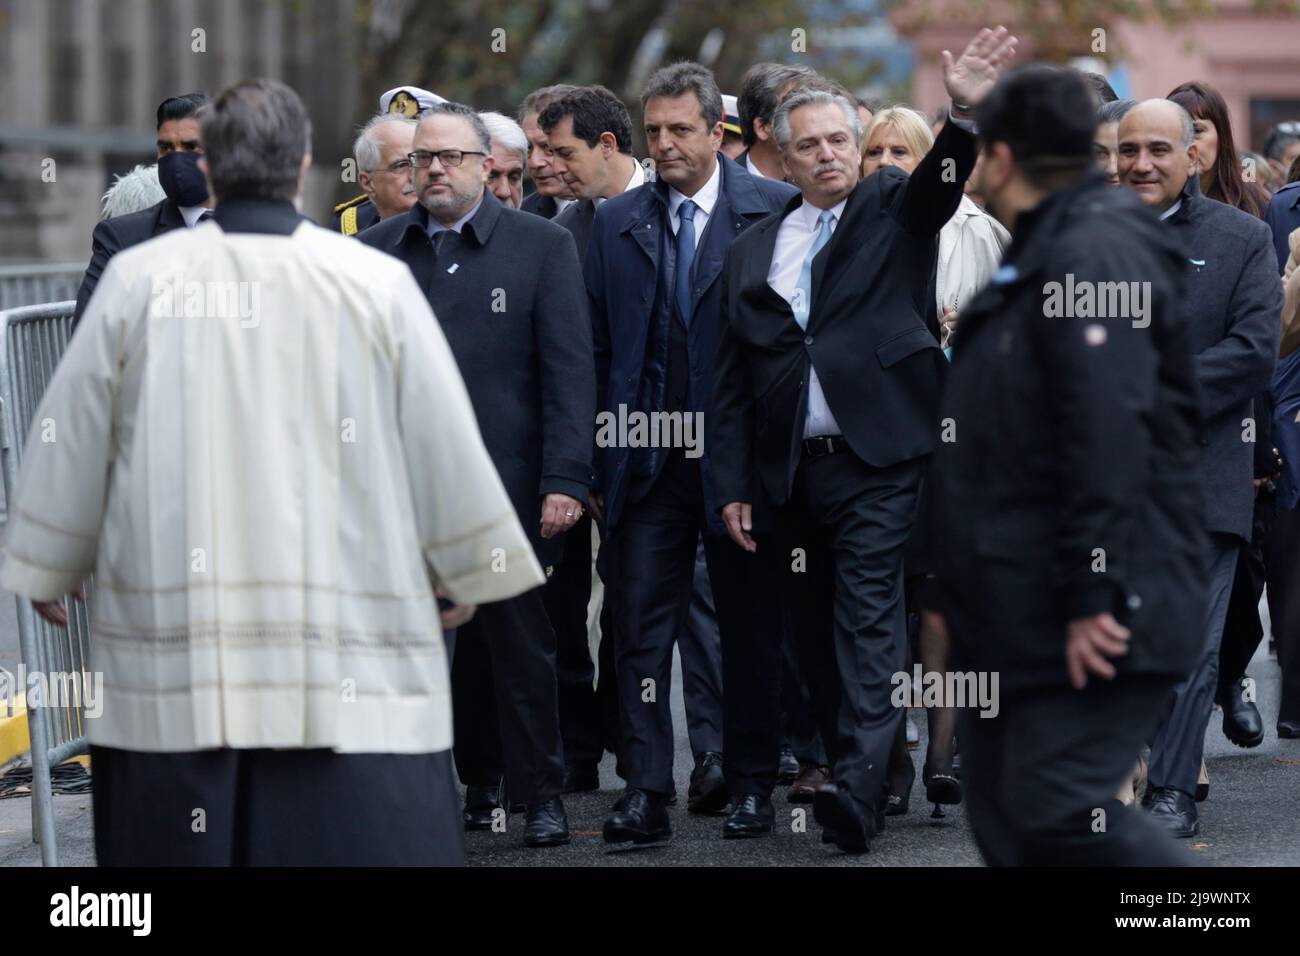 Buenos Aires, Argentina, 25th May 2022. The 212th anniversary of the May Revolution was celebrated. The President of the Nation Alberto Fernández greeted upon arrival at the Tedeum. (Credit: Esteban Osorio/Alamy Live News) Stock Photo